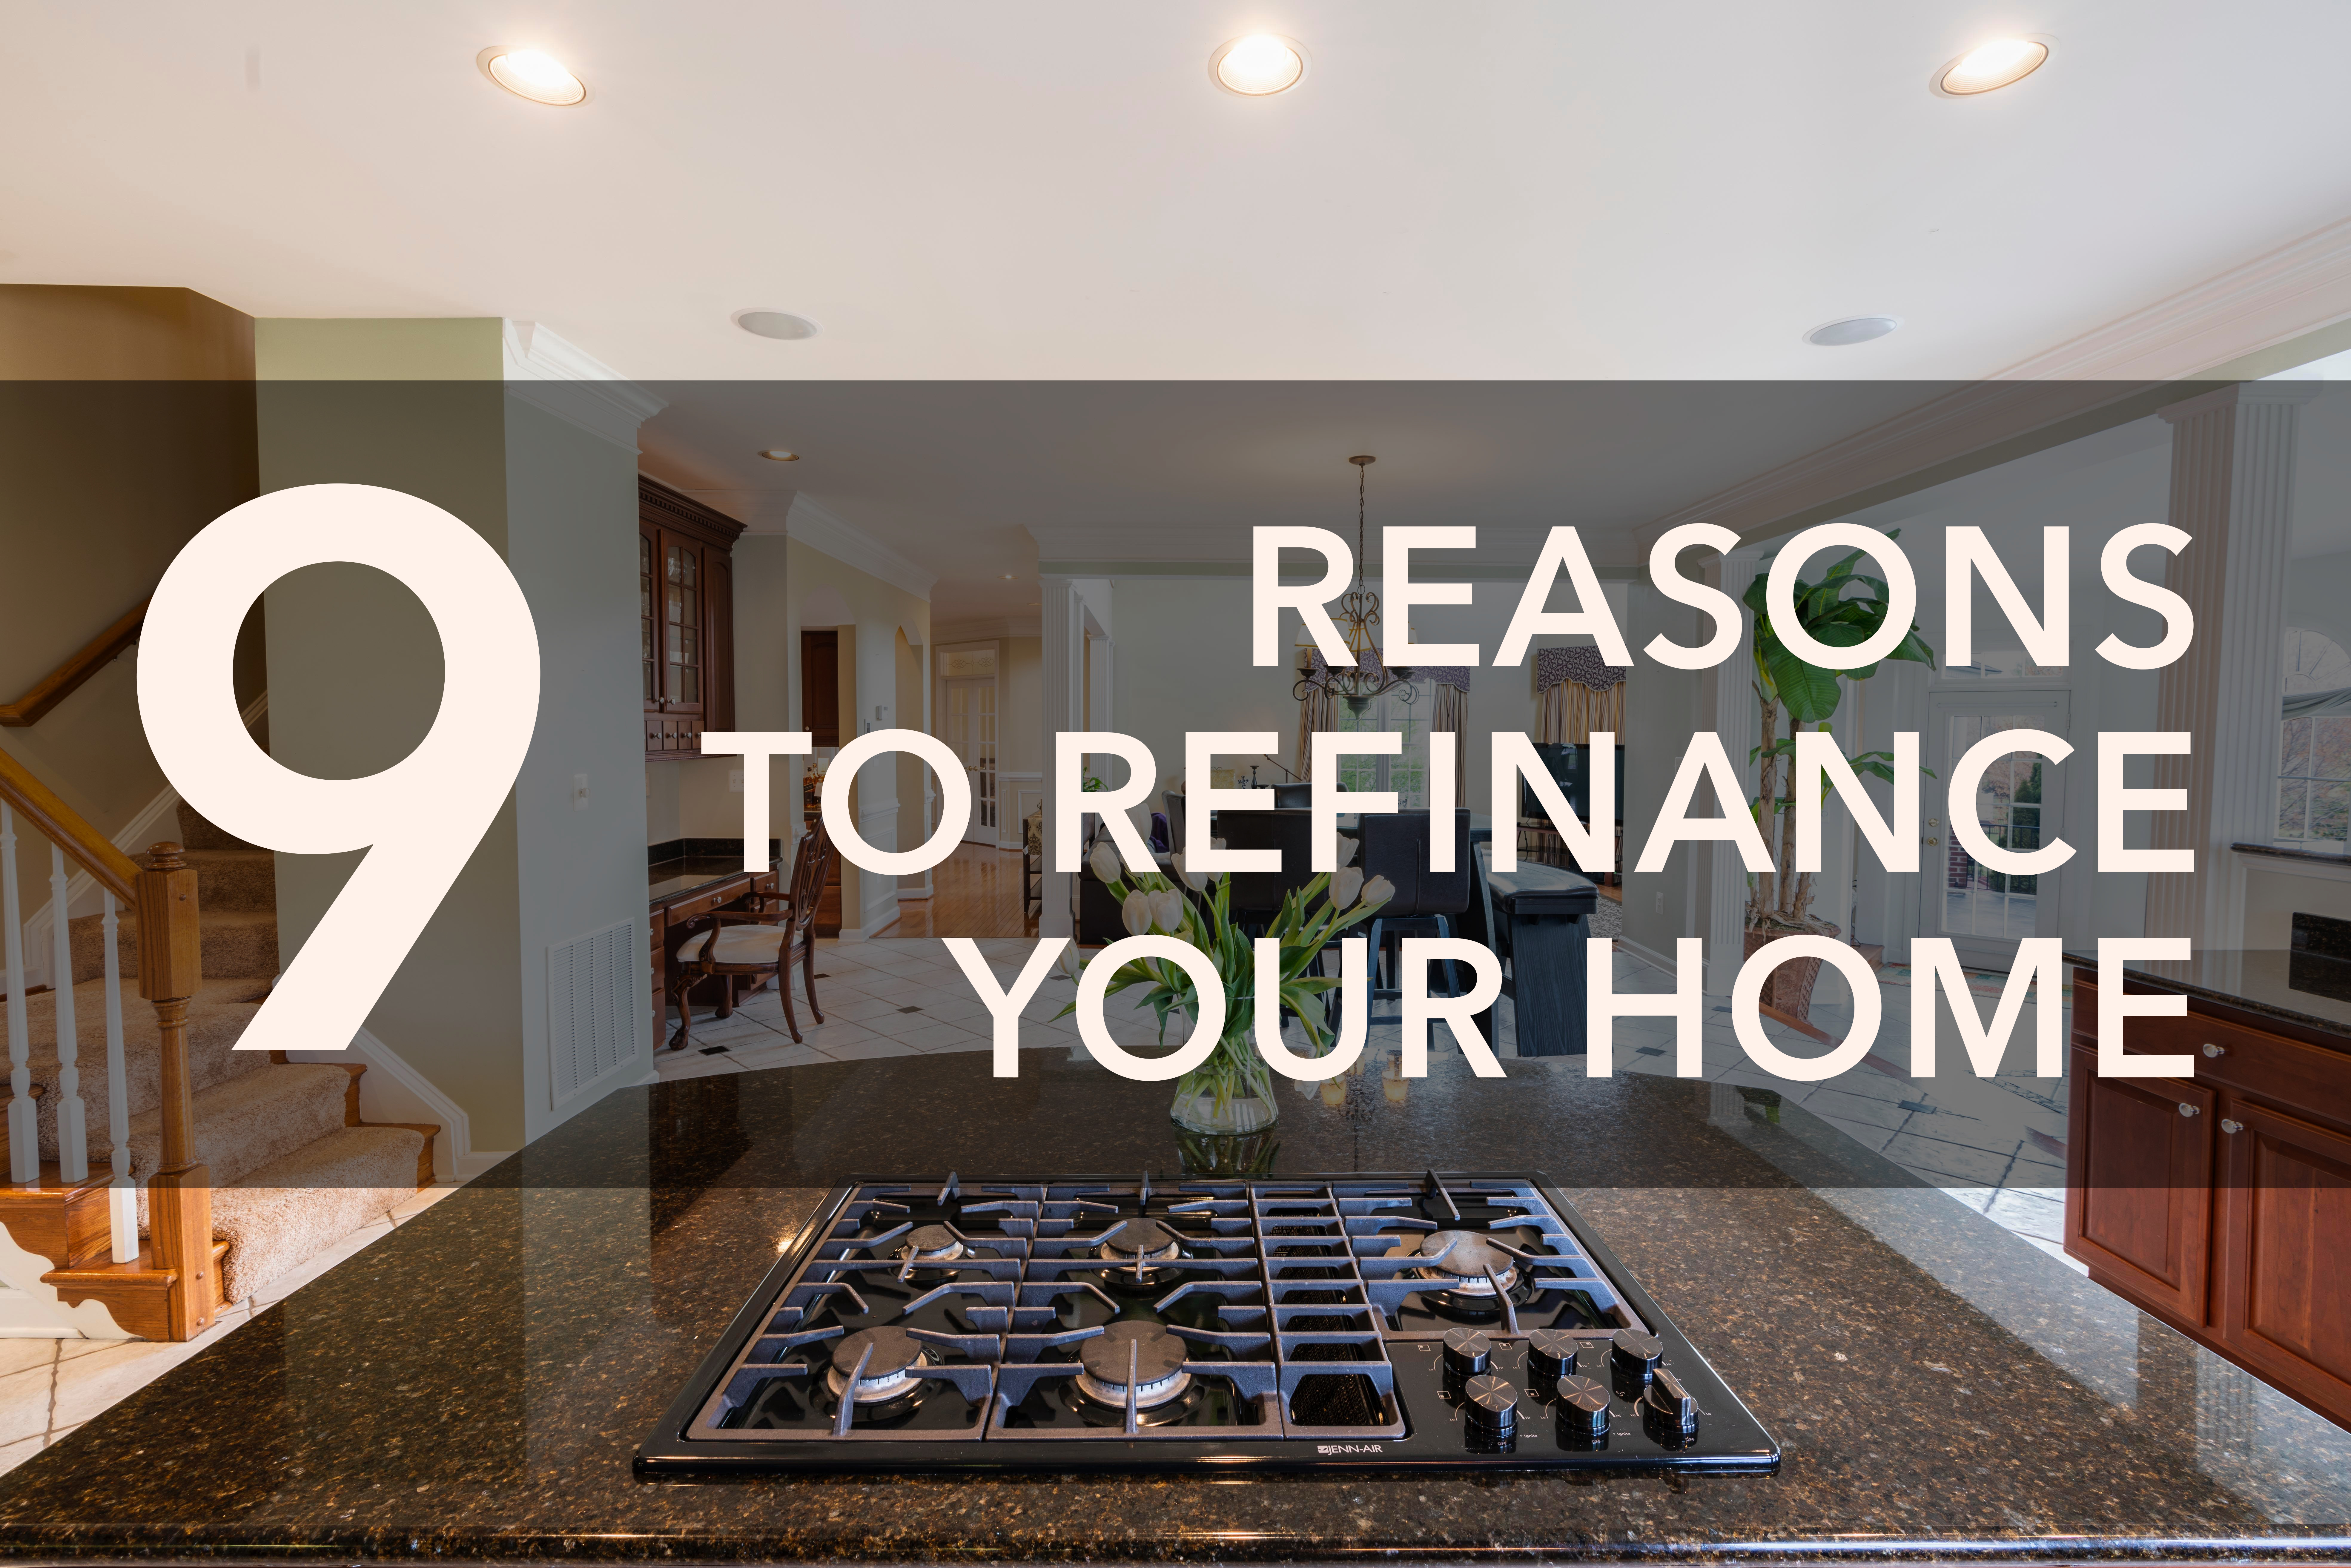 9 Reasons to Refi Your Home